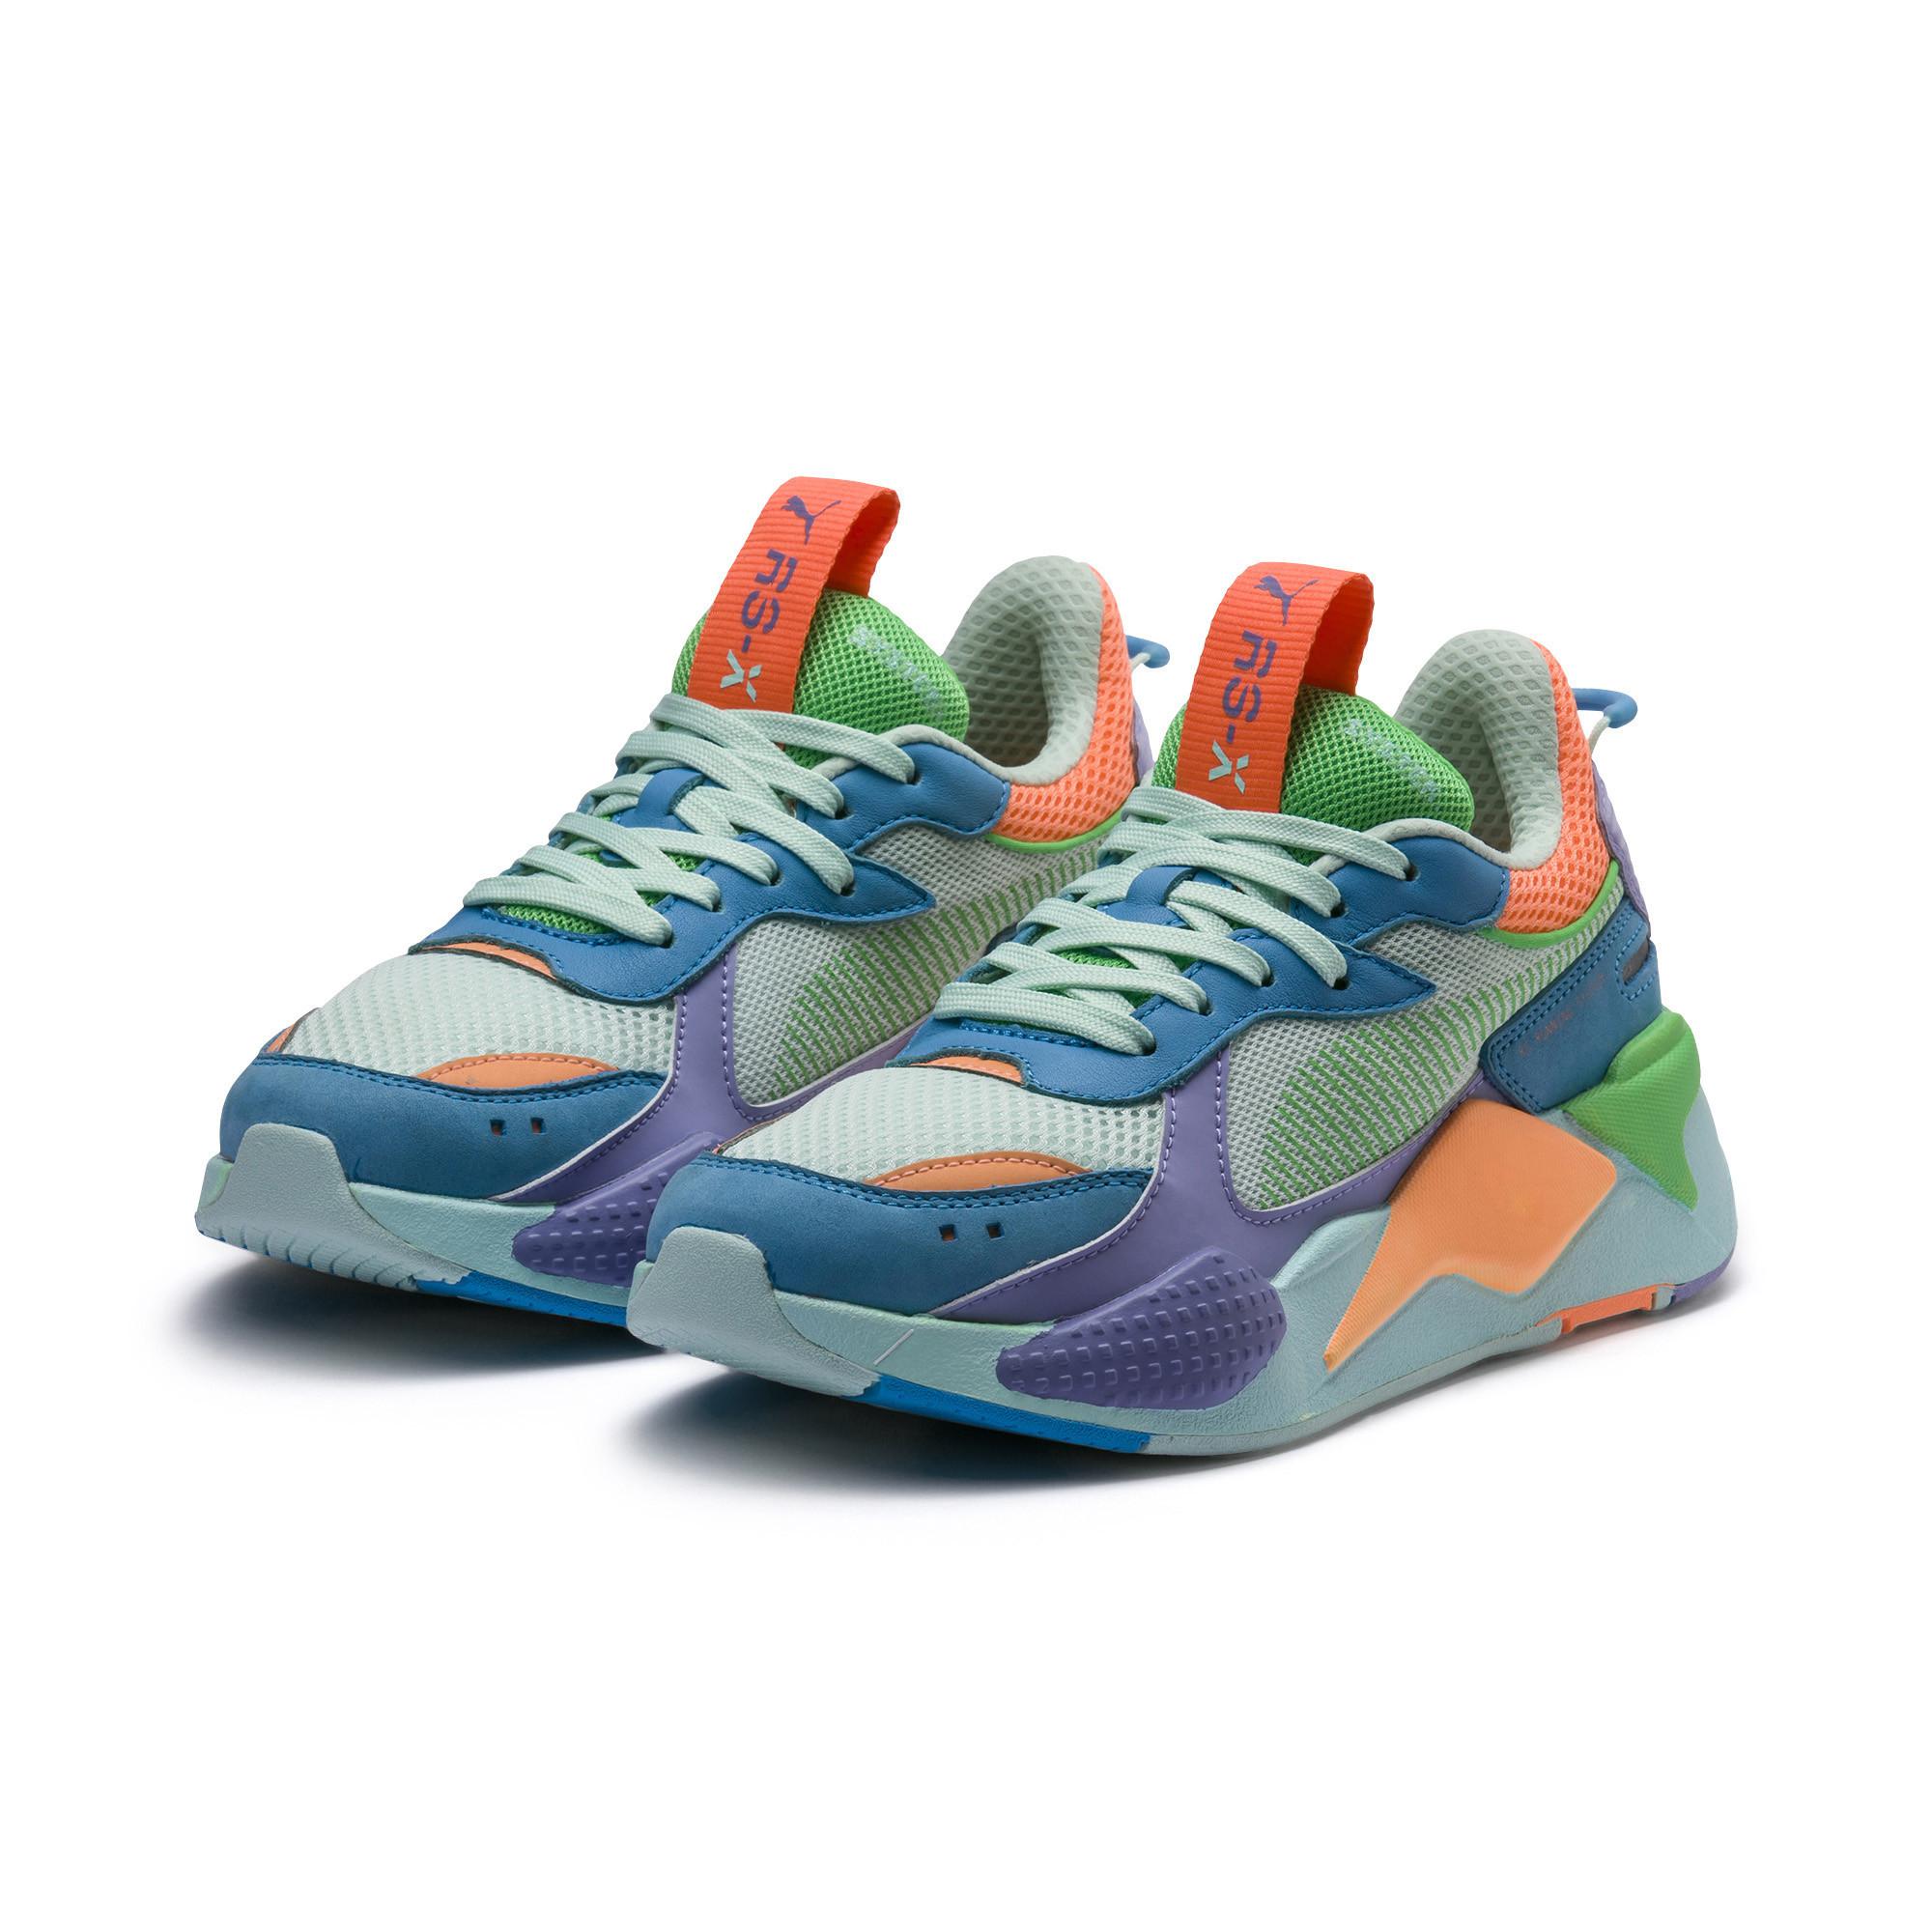 Production center Accor nap PUMA Rs-x Toys in Blue | Lyst